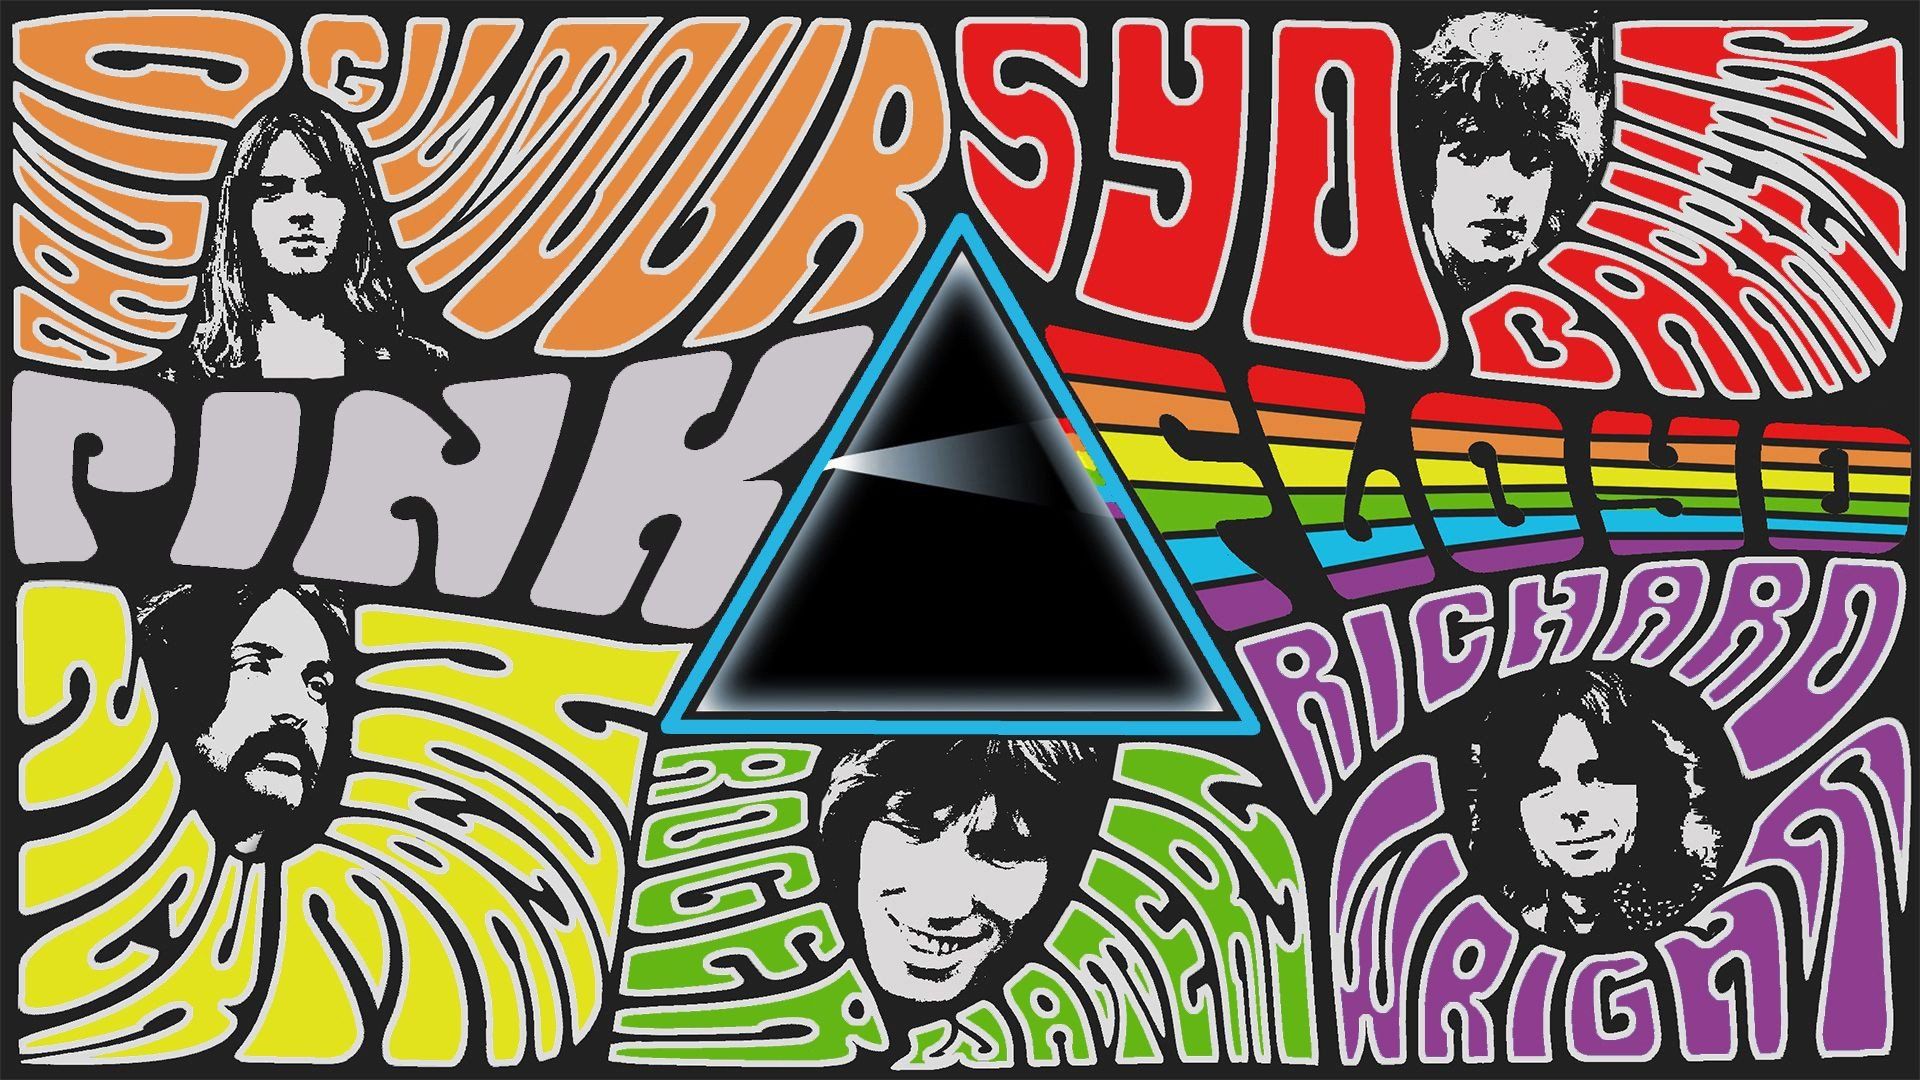 Music Pink Floyd groups psychedelic dark side Rock music collage musicians Rock Band Psychedelic rock wallpaperx1080